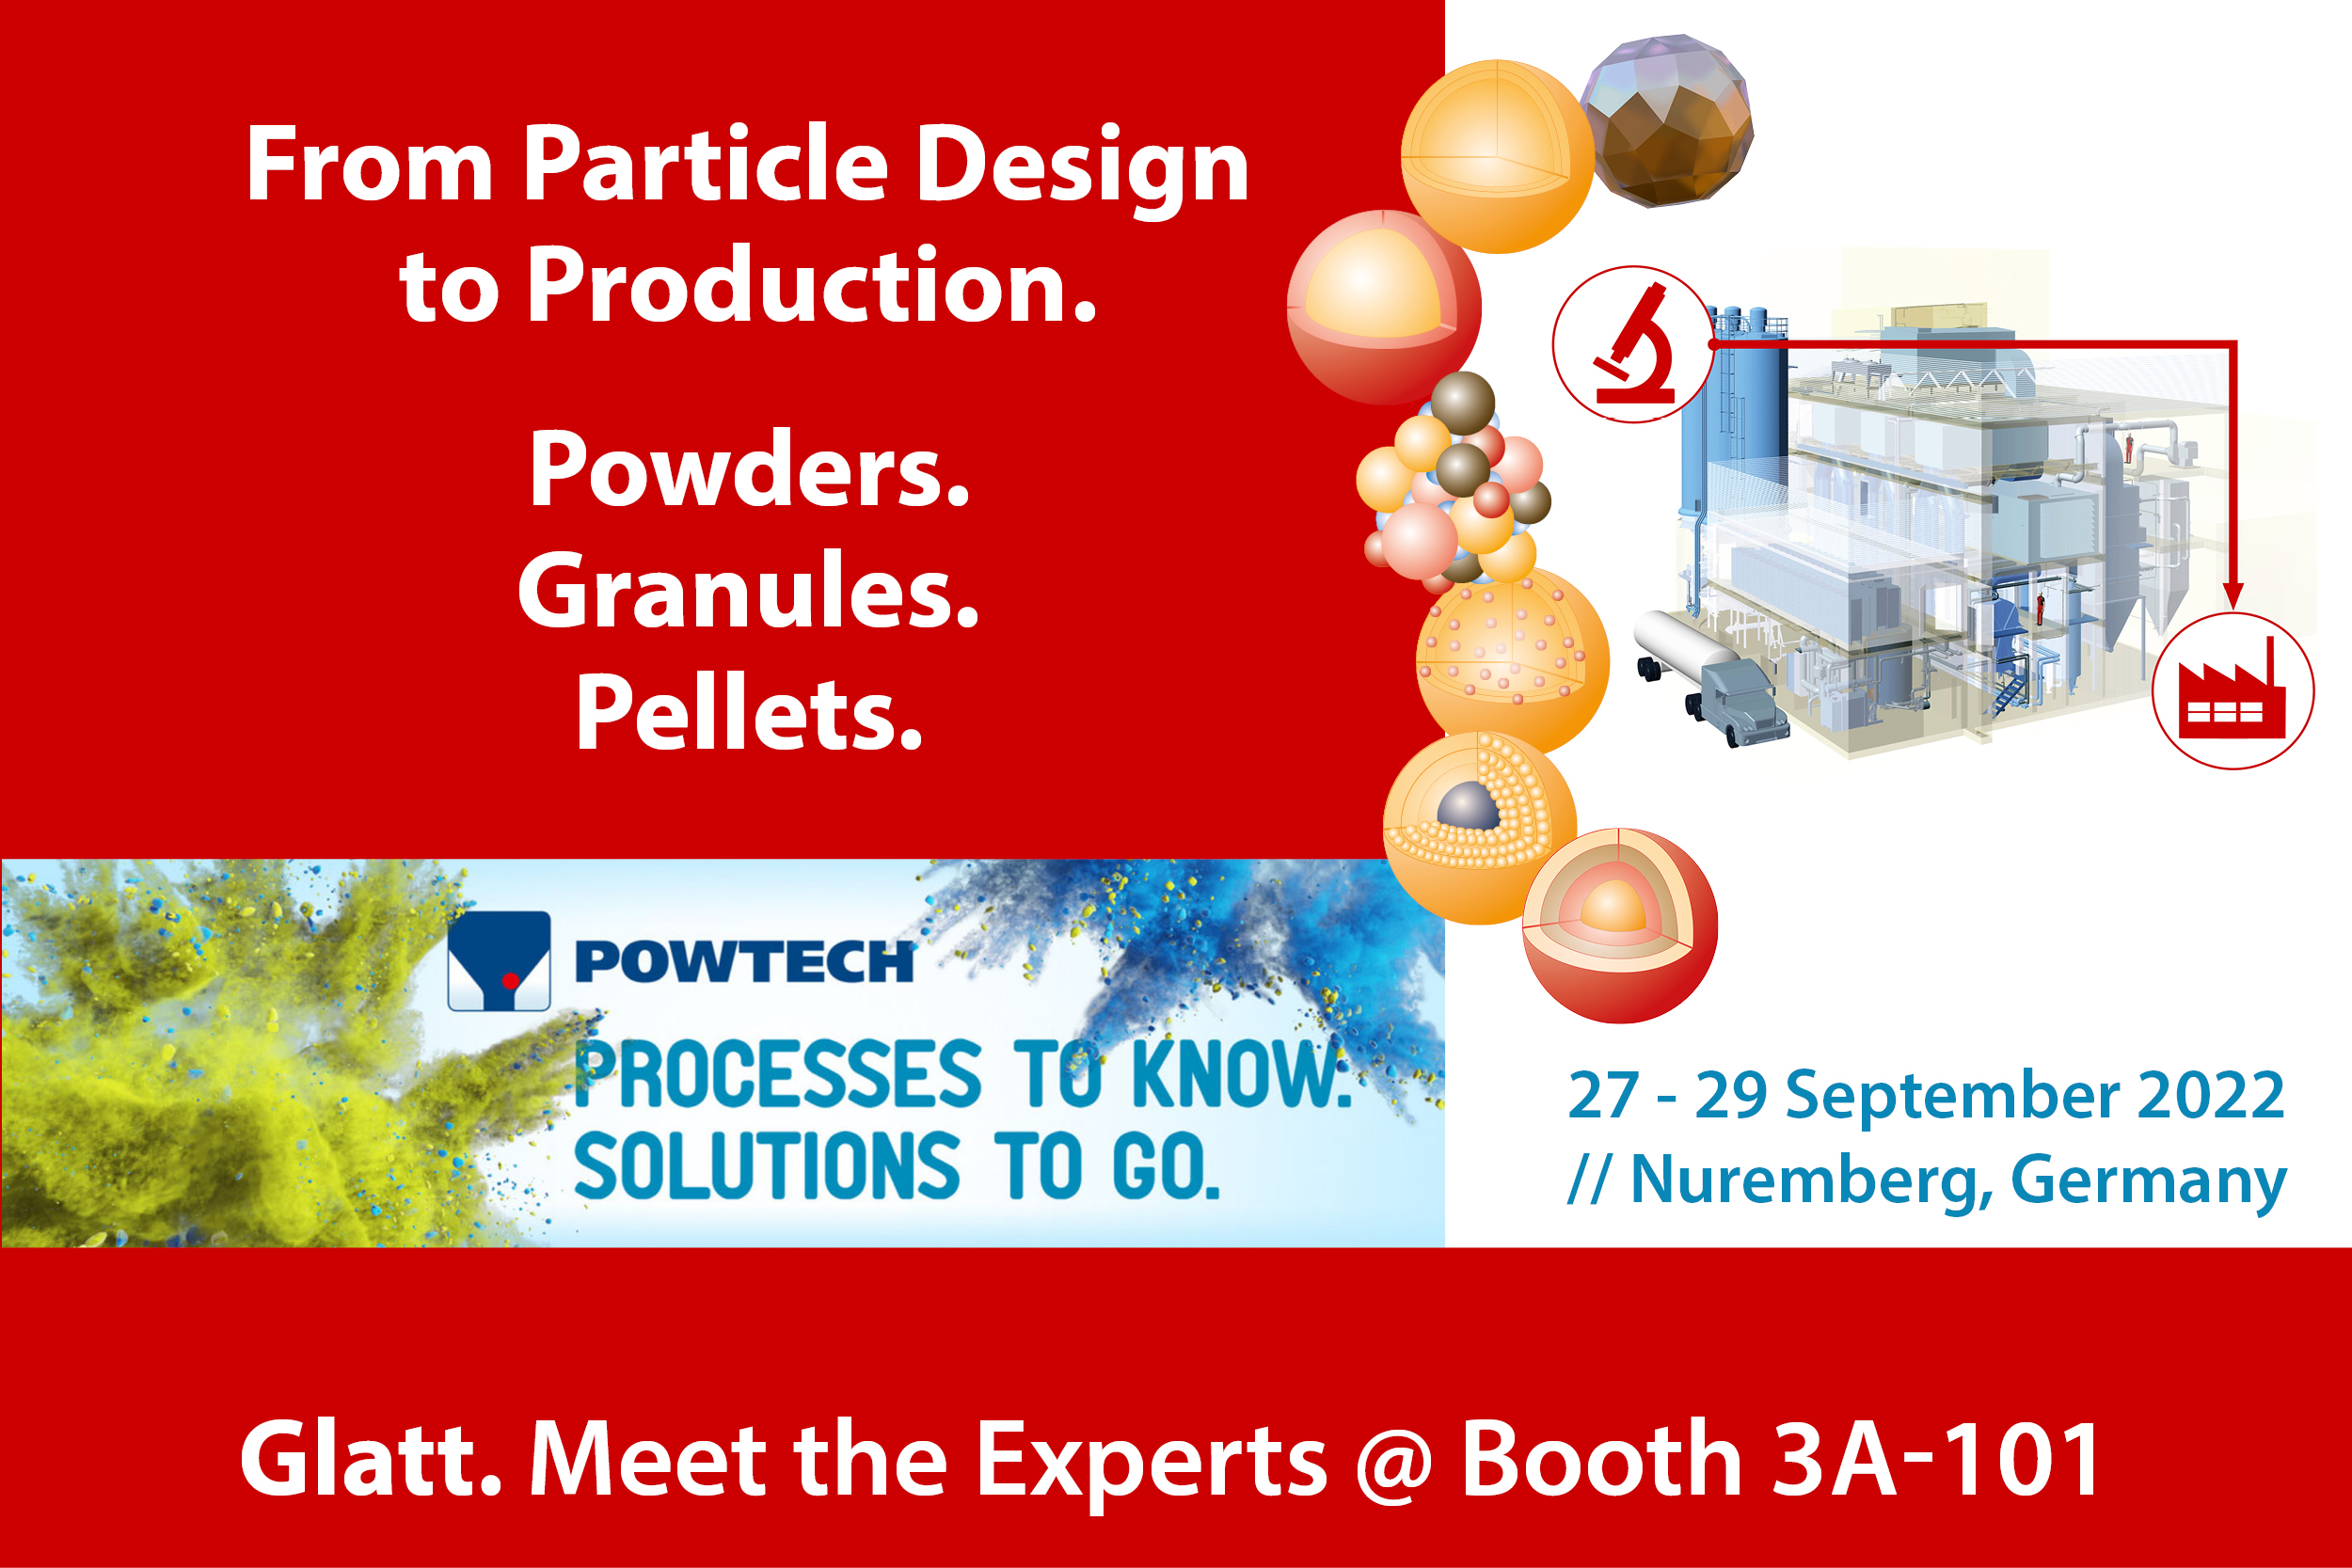 Meet our Glatt particle design and plant engineering experts at POWTECH in Nuremberg, Germany, September 27-29, 2022, booth 3A-101